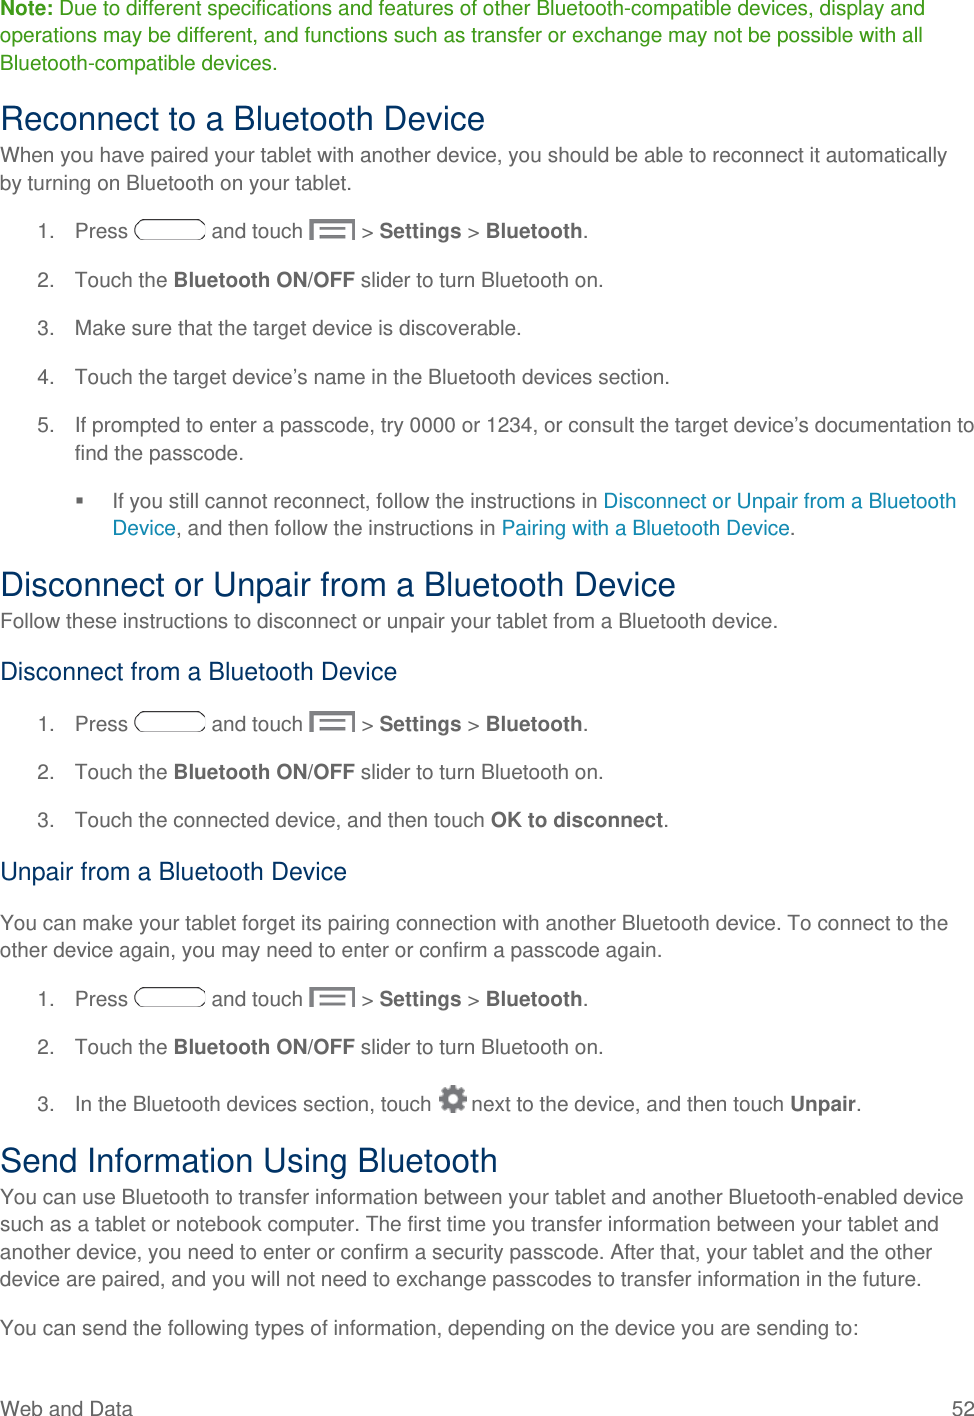 Note: Due to different specifications and features of other Bluetooth-compatible devices, display and operations may be different, and functions such as transfer or exchange may not be possible with all Bluetooth-compatible devices. Reconnect to a Bluetooth Device When you have paired your tablet with another device, you should be able to reconnect it automatically by turning on Bluetooth on your tablet. 1. Press   and touch   &gt; Settings &gt; Bluetooth. 2. Touch the Bluetooth ON/OFF slider to turn Bluetooth on. 3. Make sure that the target device is discoverable. 4. Touch the target device’s name in the Bluetooth devices section. 5. If prompted to enter a passcode, try 0000 or 1234, or consult the target device’s documentation to find the passcode.  If you still cannot reconnect, follow the instructions in Disconnect or Unpair from a Bluetooth Device, and then follow the instructions in Pairing with a Bluetooth Device. Disconnect or Unpair from a Bluetooth Device Follow these instructions to disconnect or unpair your tablet from a Bluetooth device. Disconnect from a Bluetooth Device 1. Press   and touch   &gt; Settings &gt; Bluetooth. 2. Touch the Bluetooth ON/OFF slider to turn Bluetooth on. 3. Touch the connected device, and then touch OK to disconnect. Unpair from a Bluetooth Device You can make your tablet forget its pairing connection with another Bluetooth device. To connect to the other device again, you may need to enter or confirm a passcode again. 1. Press   and touch   &gt; Settings &gt; Bluetooth. 2. Touch the Bluetooth ON/OFF slider to turn Bluetooth on. 3. In the Bluetooth devices section, touch   next to the device, and then touch Unpair. Send Information Using Bluetooth You can use Bluetooth to transfer information between your tablet and another Bluetooth-enabled device such as a tablet or notebook computer. The first time you transfer information between your tablet and another device, you need to enter or confirm a security passcode. After that, your tablet and the other device are paired, and you will not need to exchange passcodes to transfer information in the future. You can send the following types of information, depending on the device you are sending to: Web and Data 52   